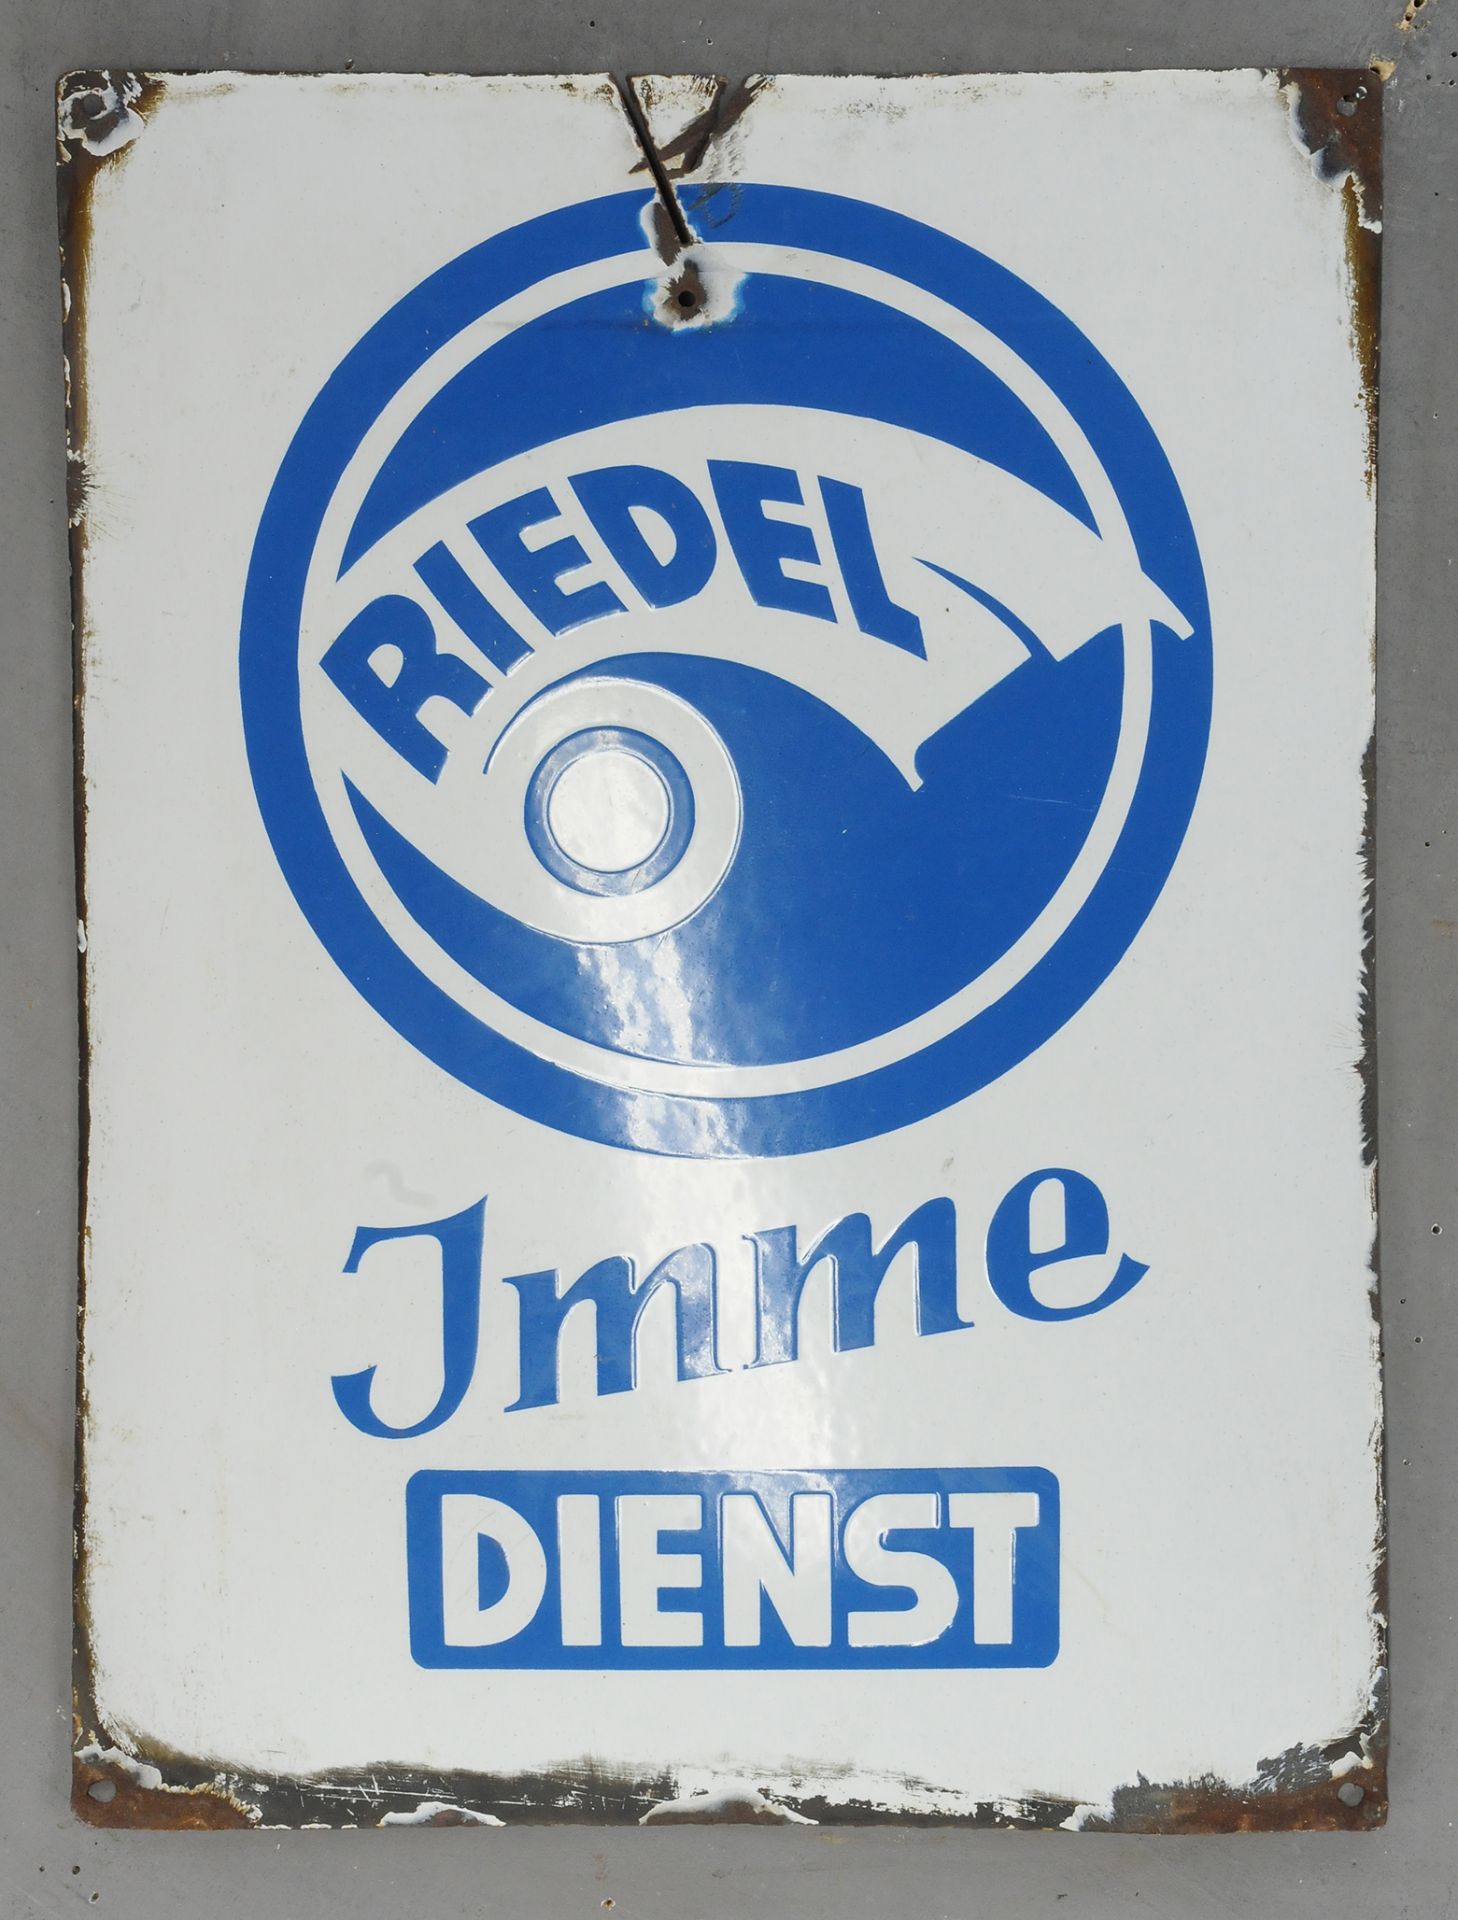 Riedel Imme Dienst - Image 3 of 3